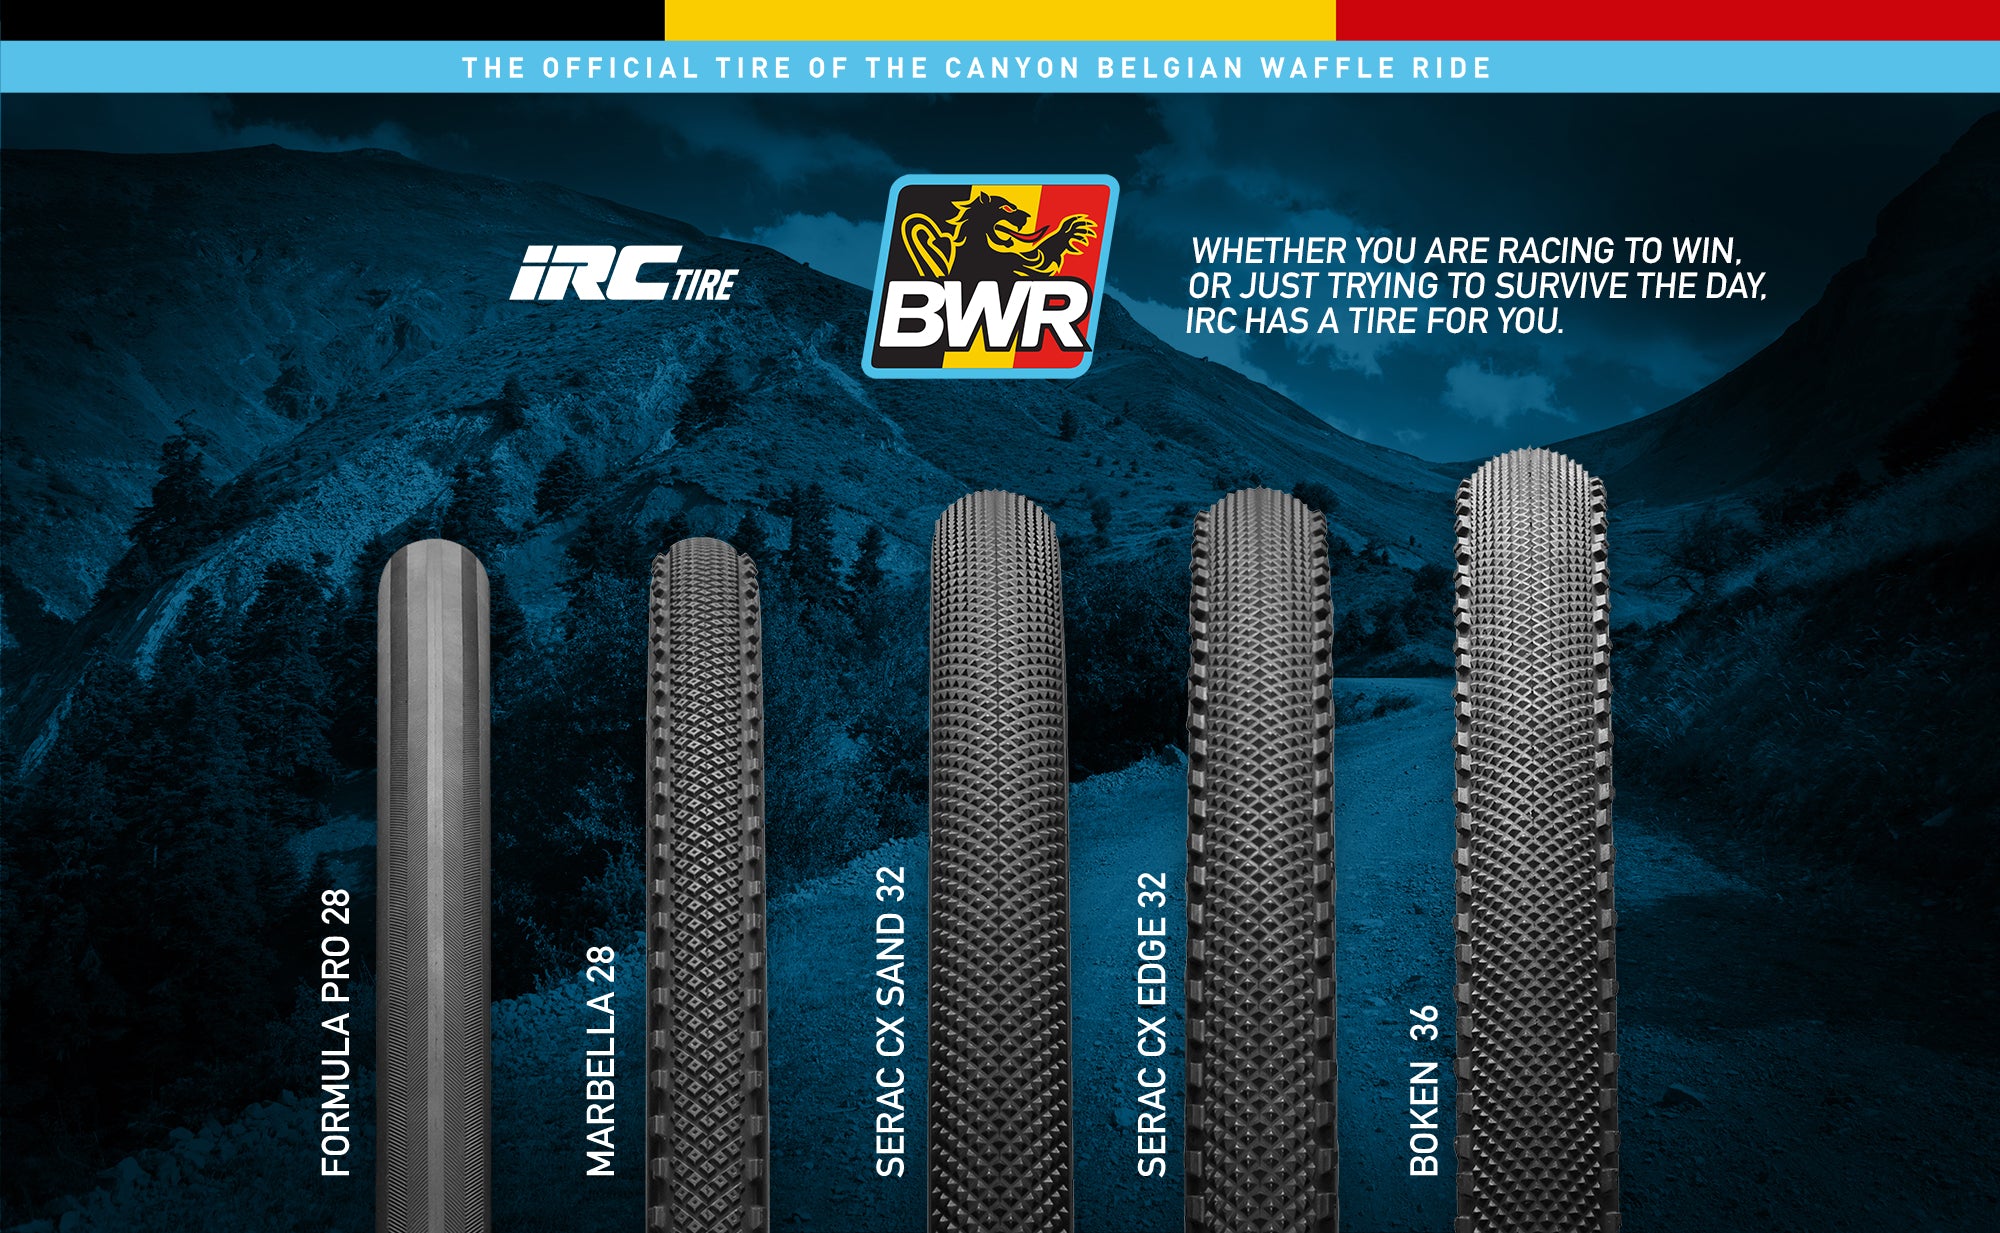 IRC is The official Tire of the Belgian Waffle Ride